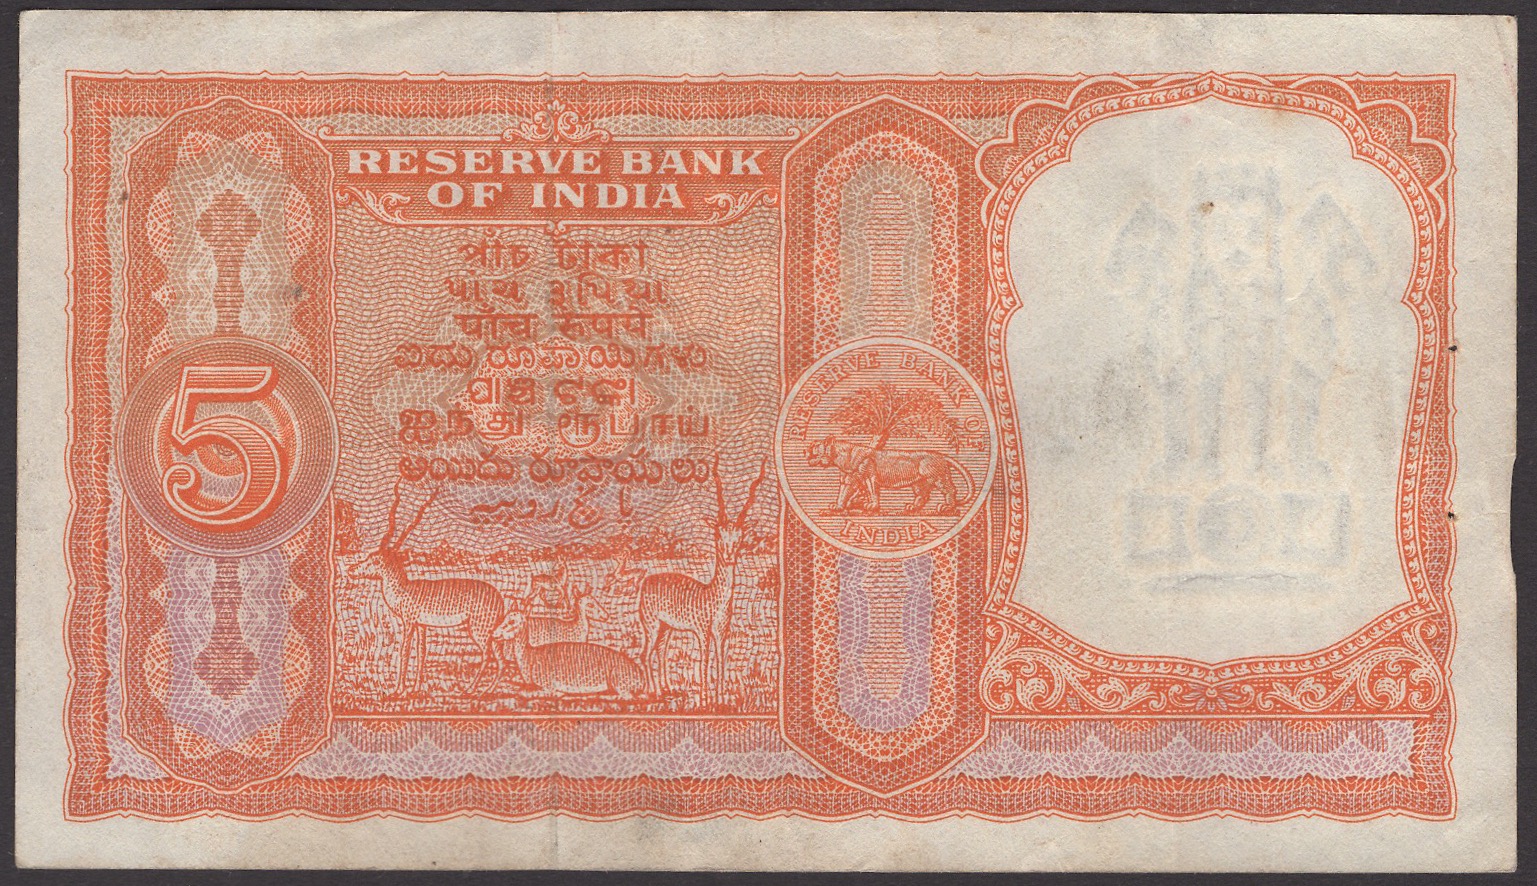 Reserve Bank of India, Persian Gulf Issue, 5 Rupees, ND (1957-62), serial number Z/3... - Image 2 of 2